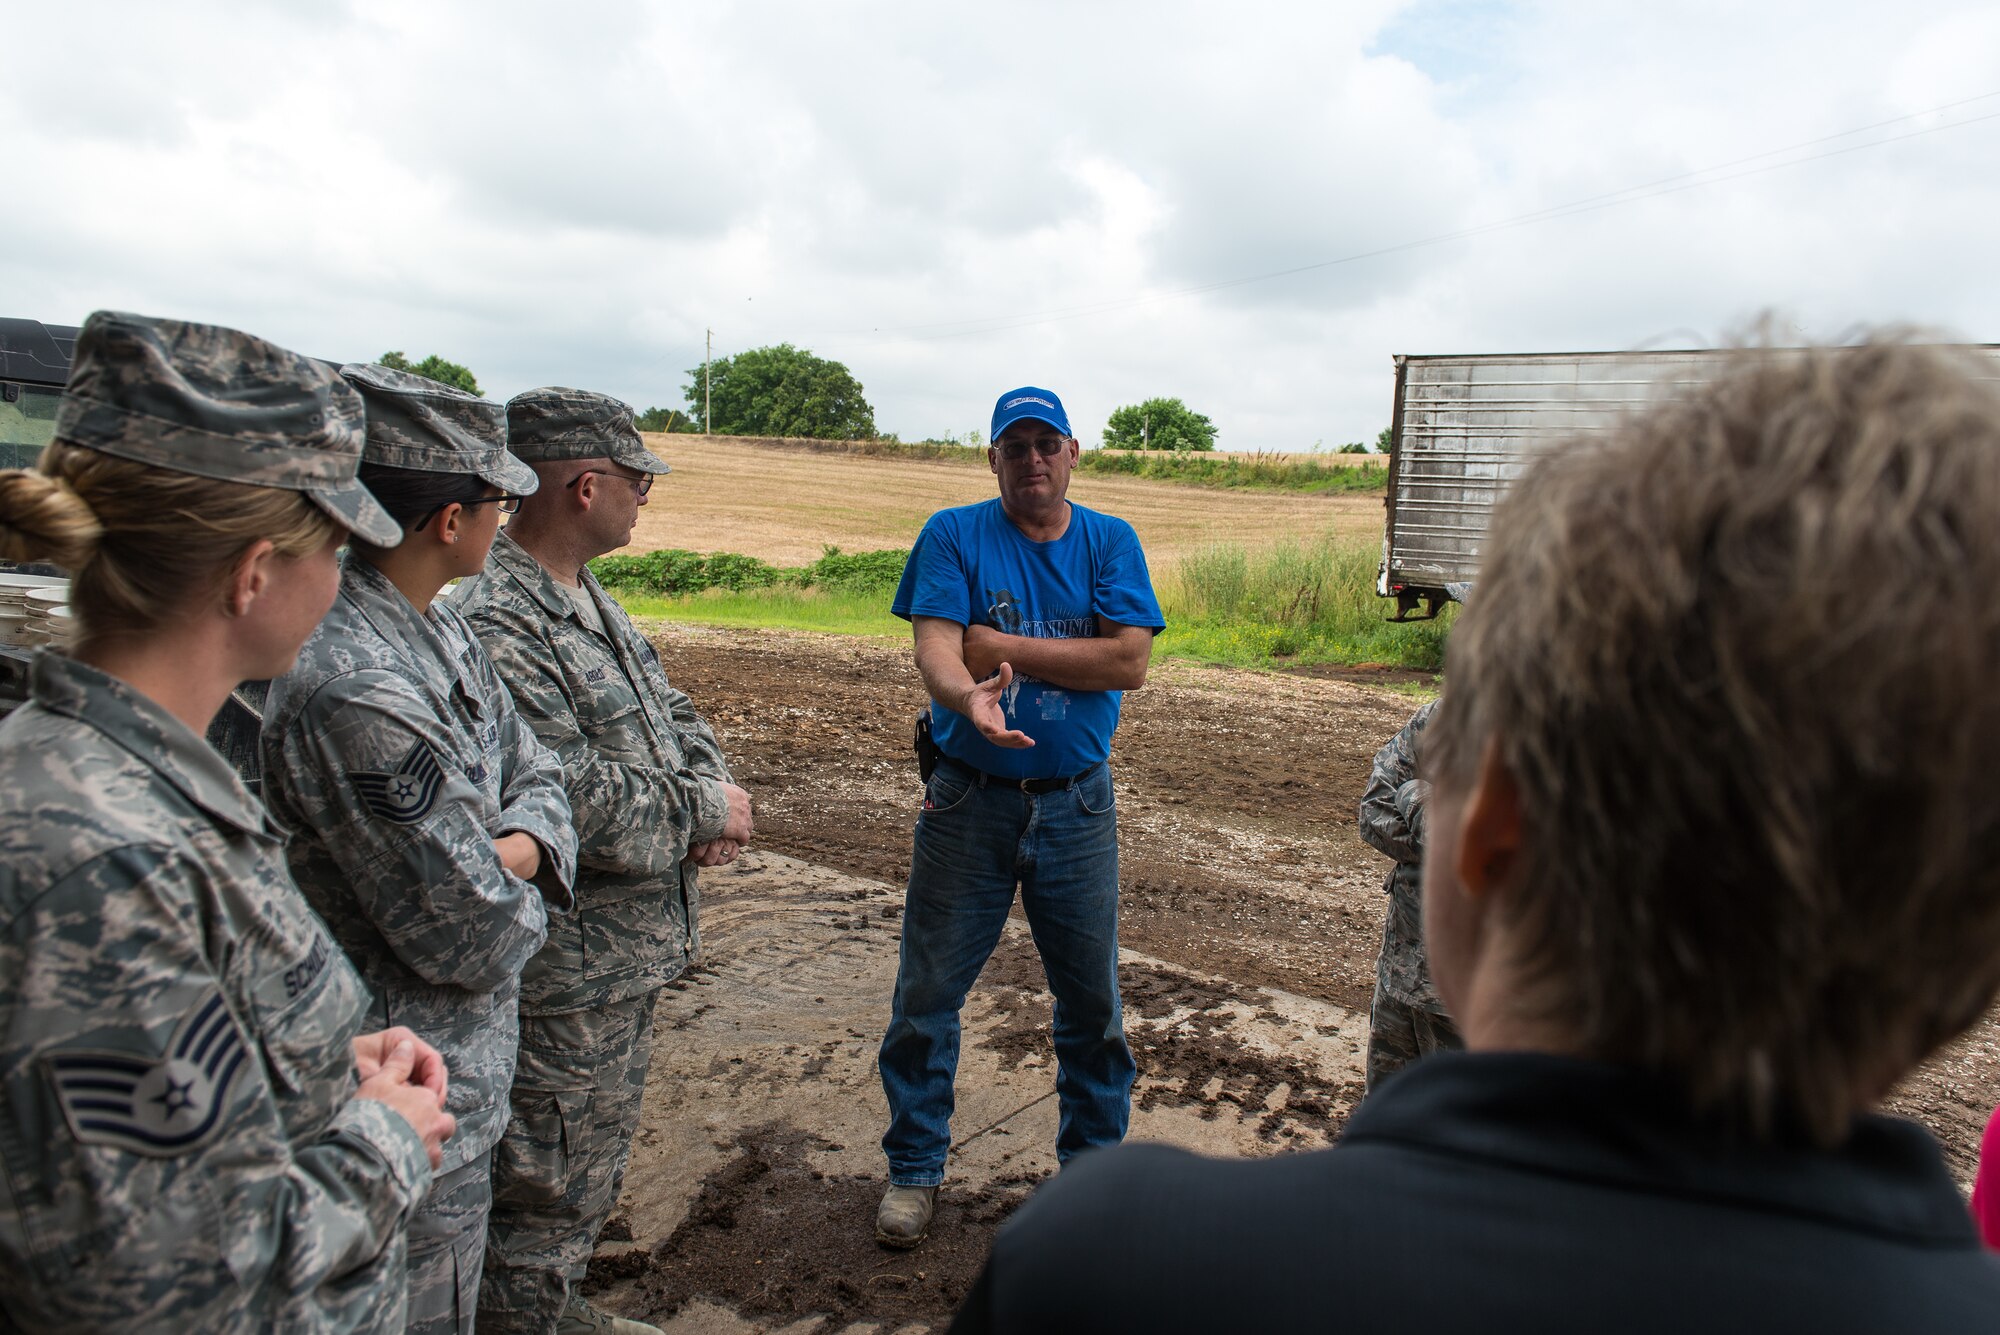 Wayne Lohmann, a farmer at Lohmann Farms, discusses dairy operations with U.S. Air Force public health professionals and representatives from the Cape Girardeau County Public Health Commission during a site visit in Perryville, Mo., June 18, 2019. Airmen deployed in support of Delta Area Economic Opportunity Corporation Tri-State Innovative Readiness Training 2019 coordinated with civilian public health agency partners to view livestock processes and promote interagency cooperation. (U.S. Air National Guard photo by Senior Airman Jonathan W. Padish)